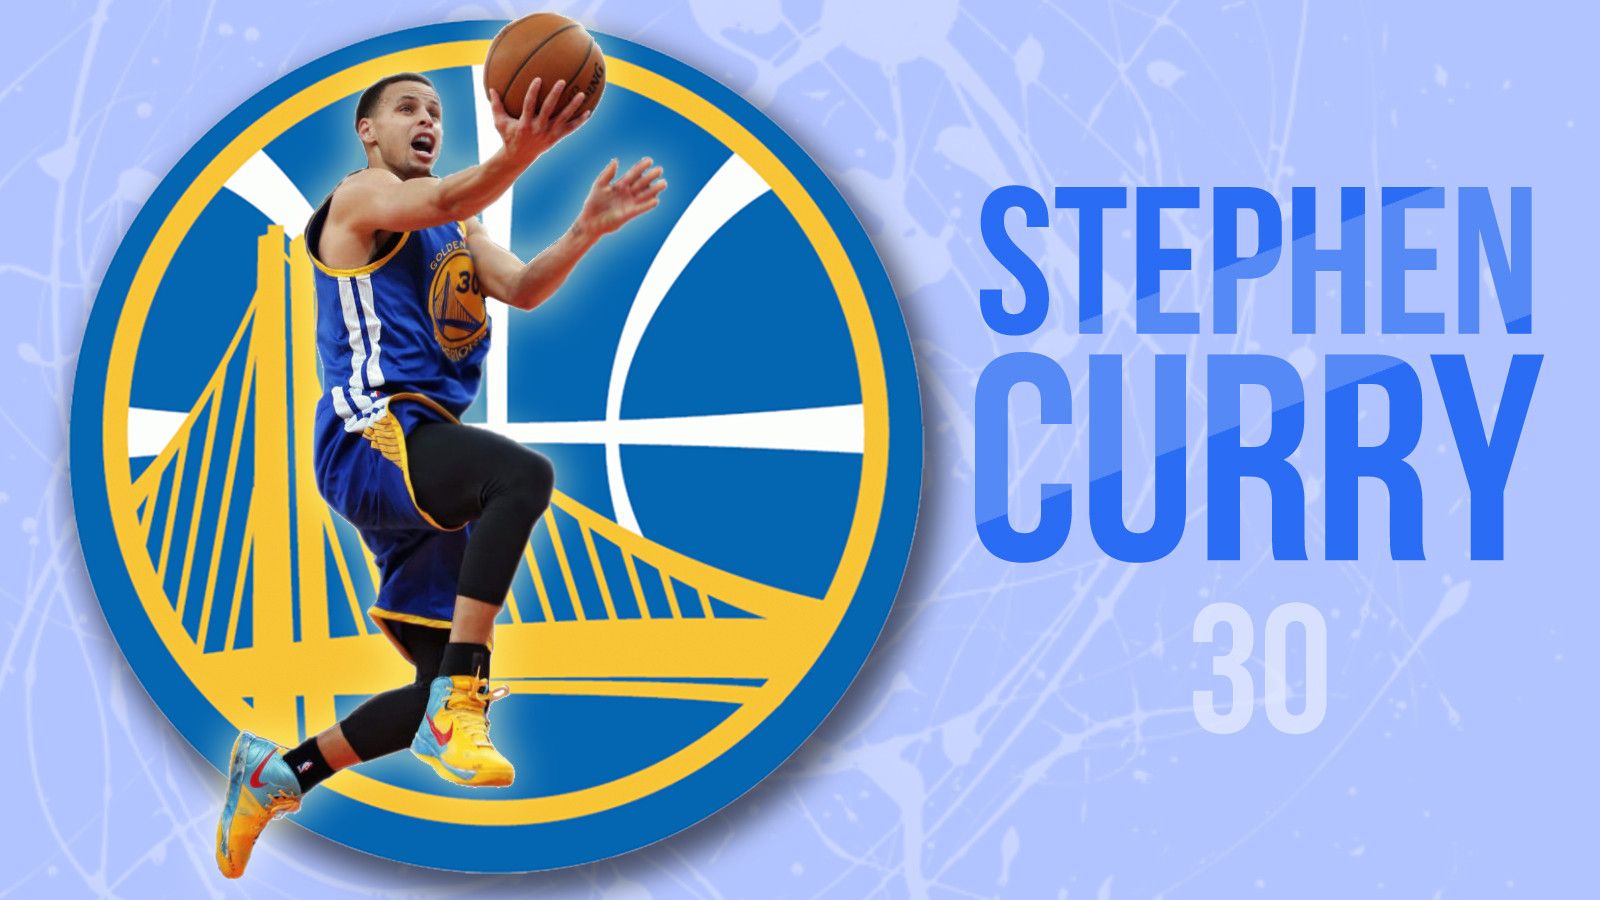 Steph Curry 3 Pointer Wallpaper